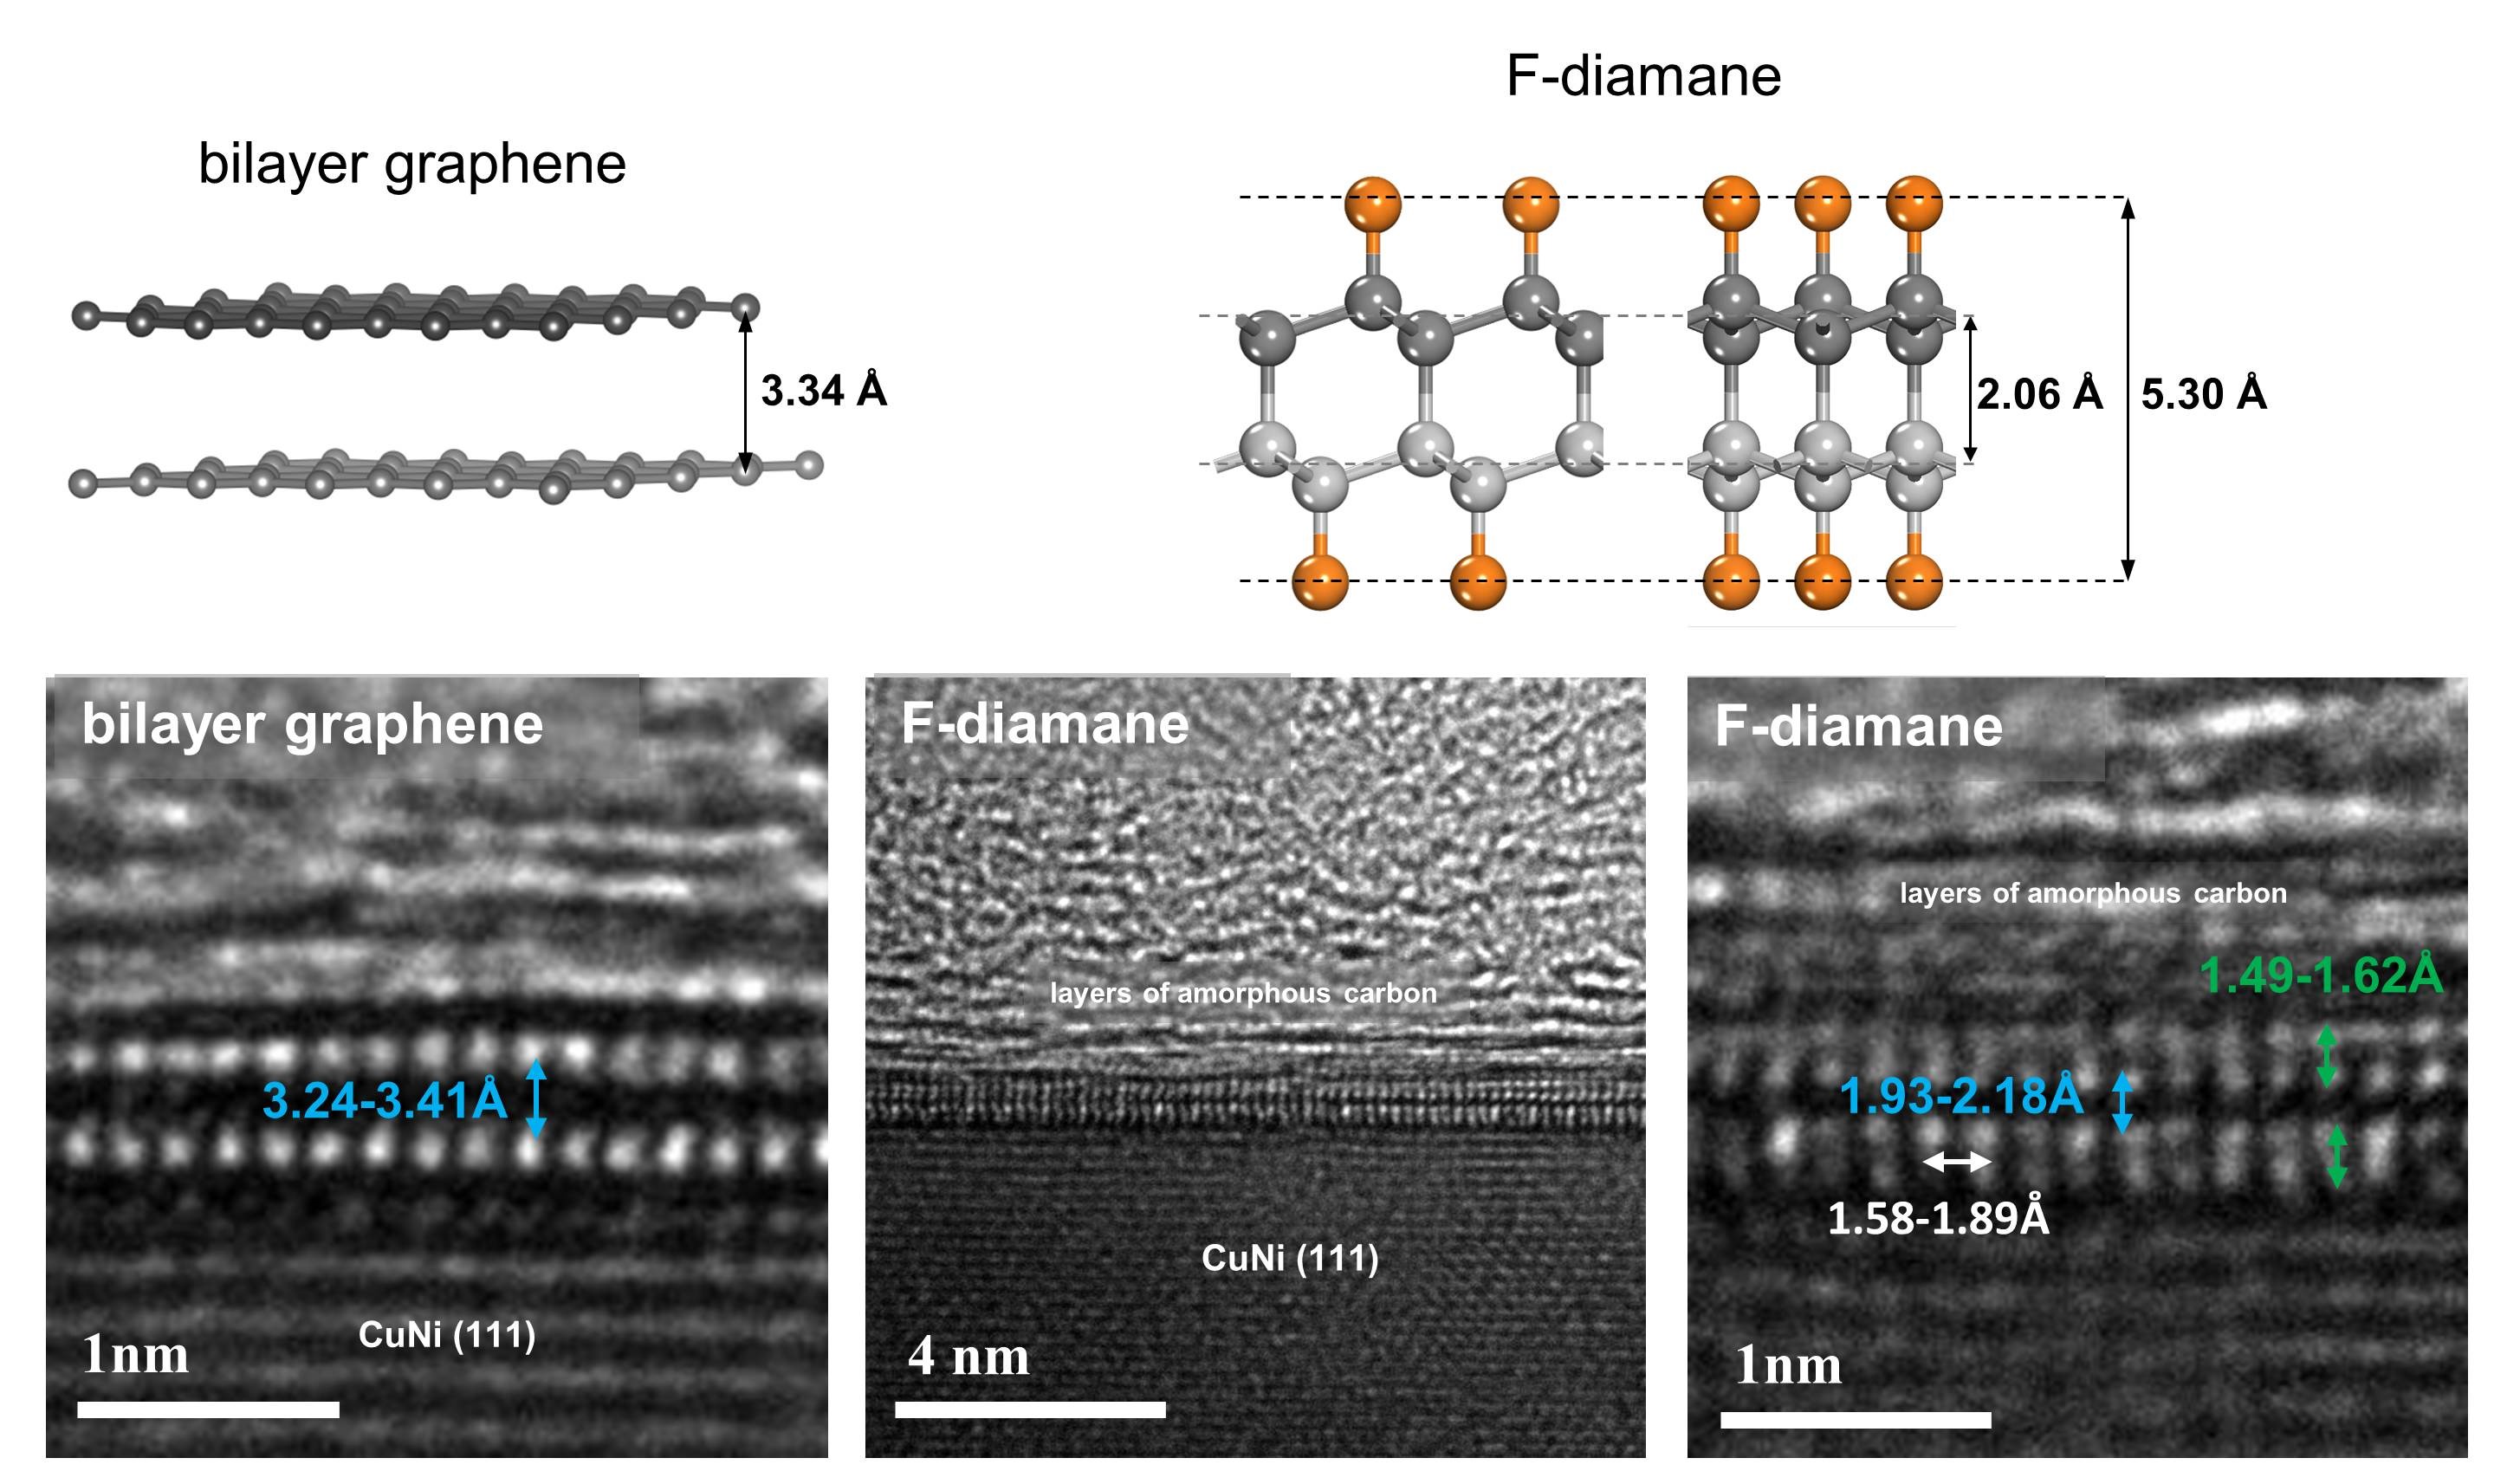 Comparison between bilayer graphene and fluorinated monolayer diamond (F-diamane). Top: Optimized models of bilayer graphene and F-diamane. Orange and grey spheres represent fluorine and carbon atoms, respectively. Bottom: Cross-sectional transmission electron micrographs of as-grown bilayer graphene and F-diamane with the highlighted interlayer and interatomic distances.